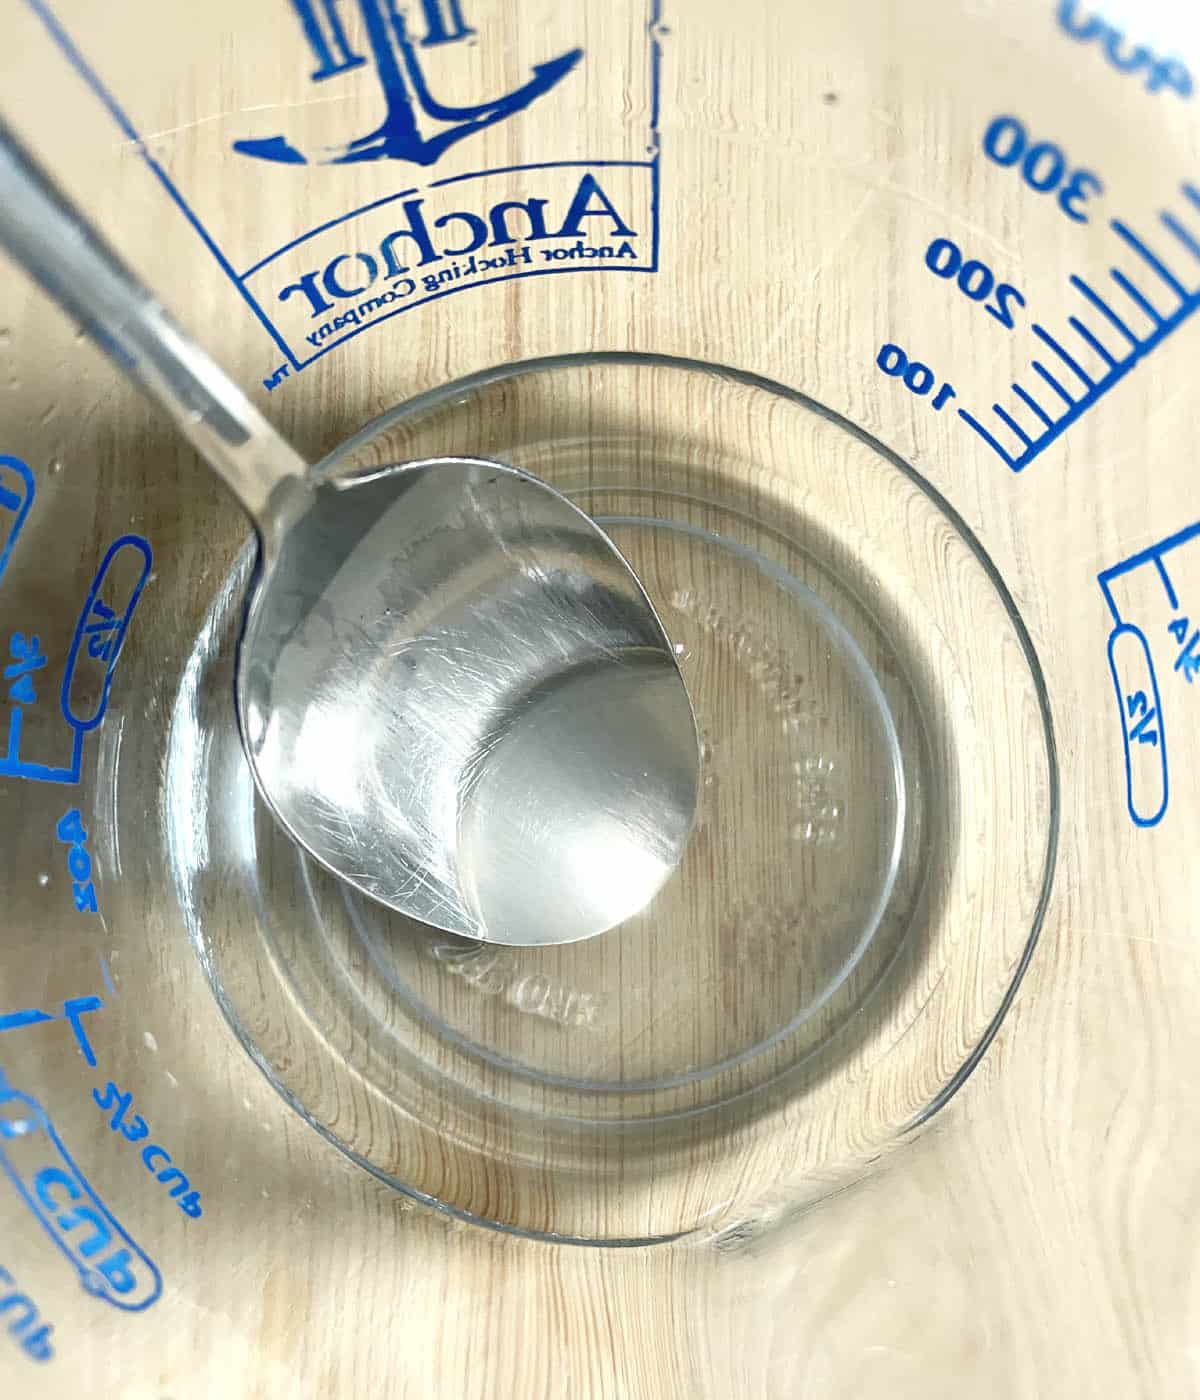 A glass measuring cup containing a clear liquid and a spoon.